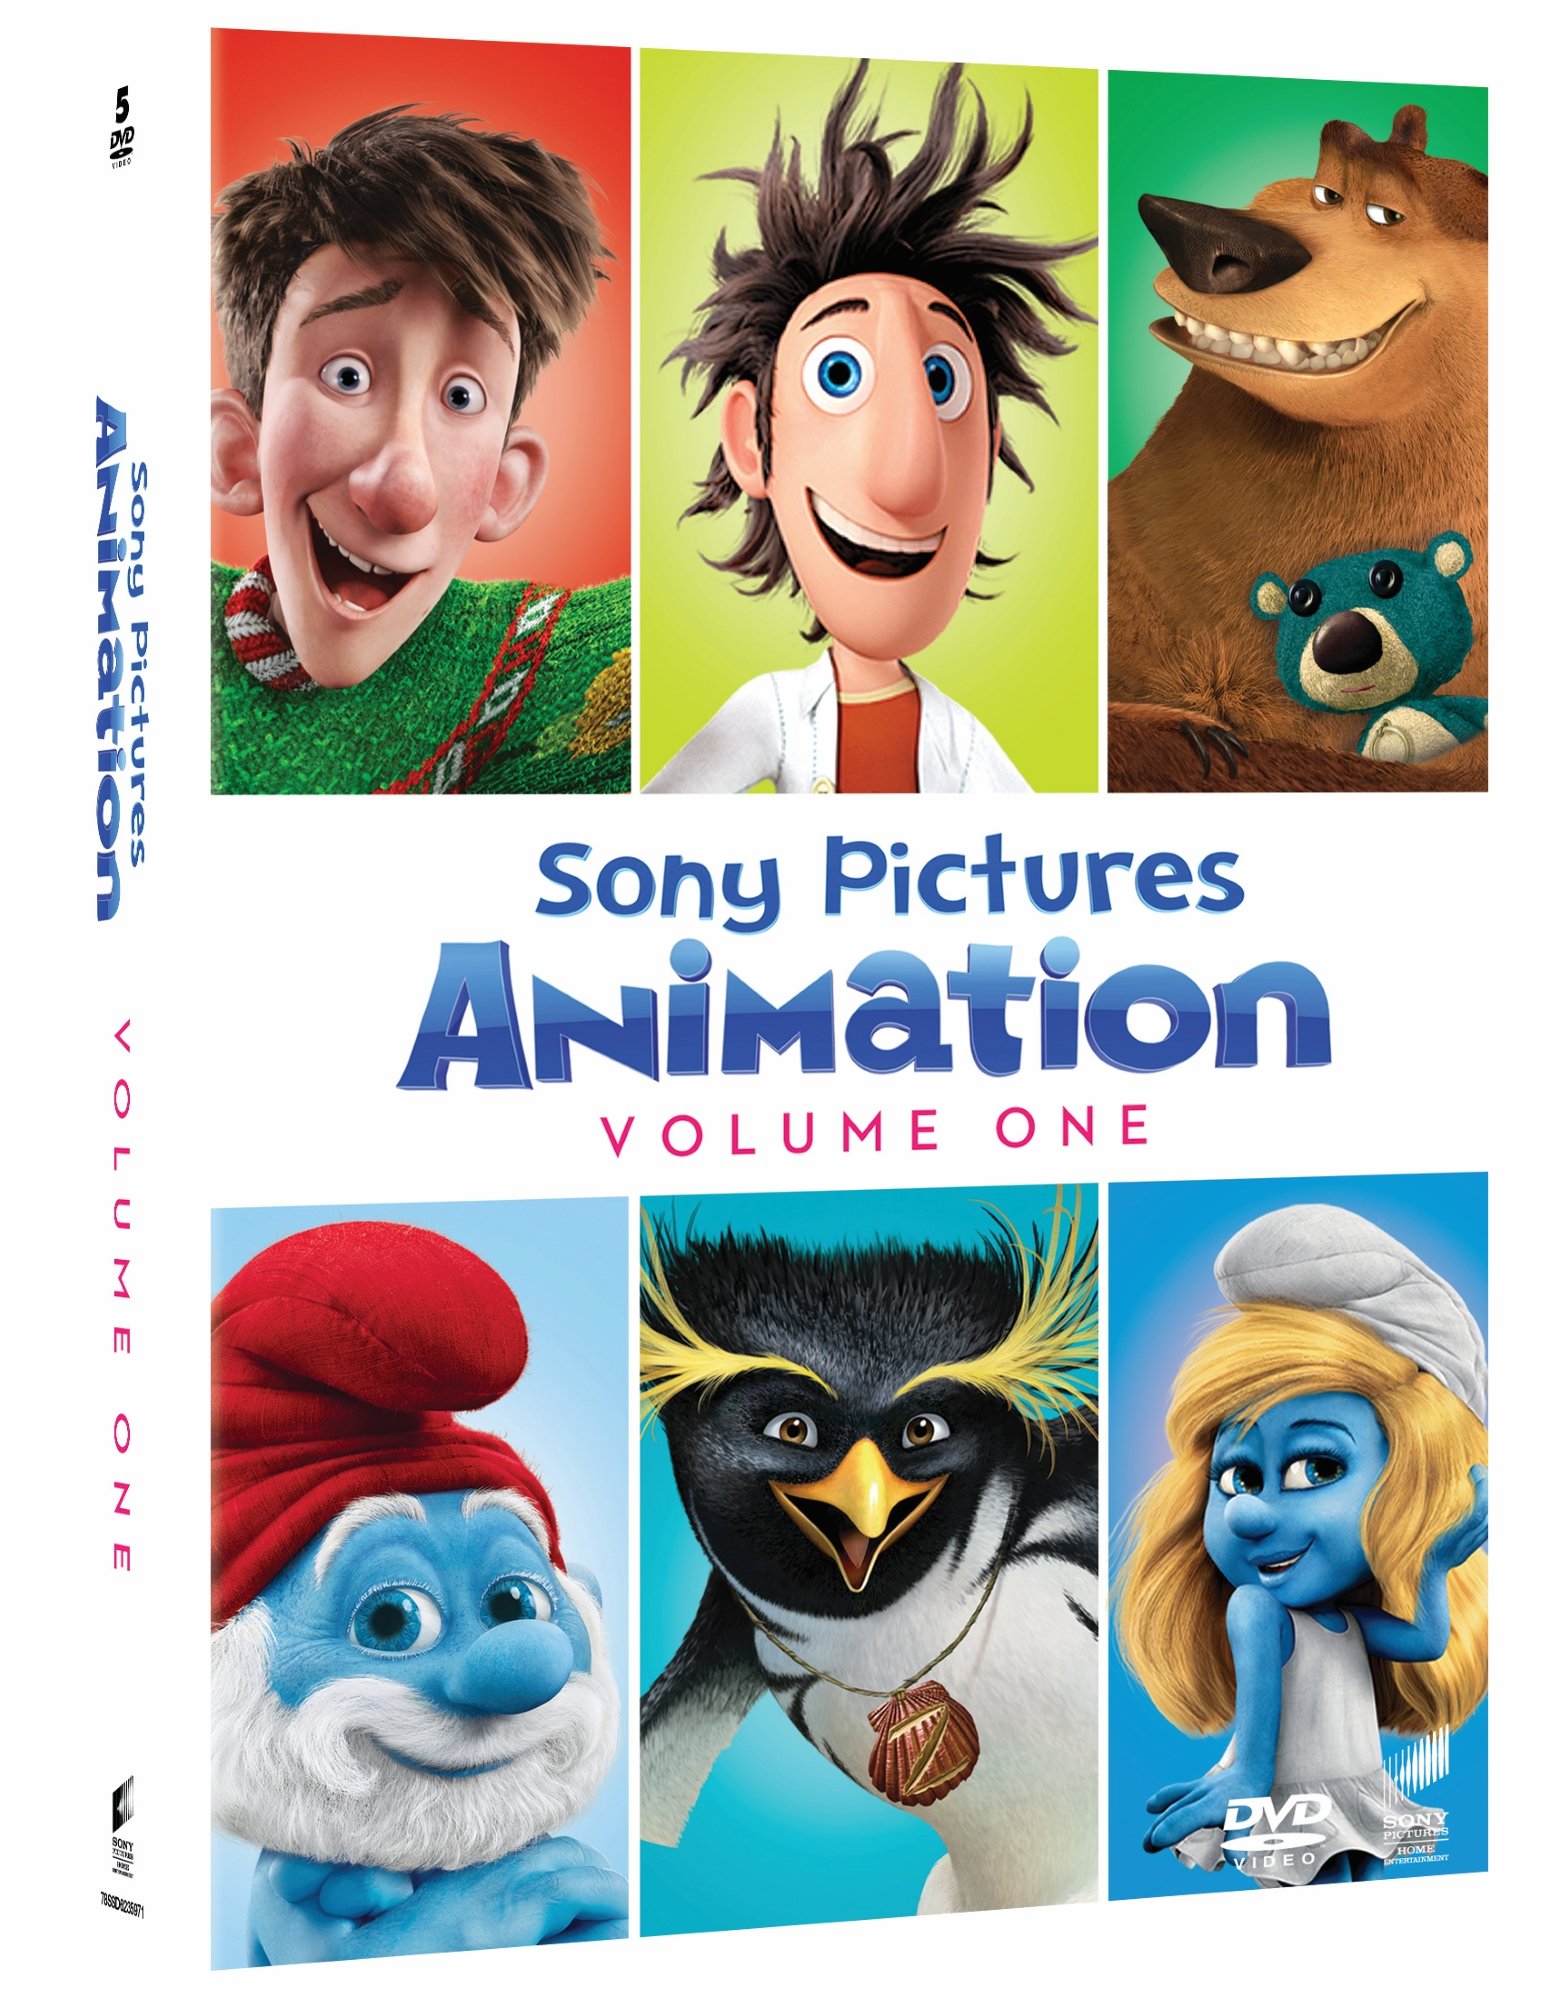 Buy Sony Pictures Animation Vol 1 Box - DVD